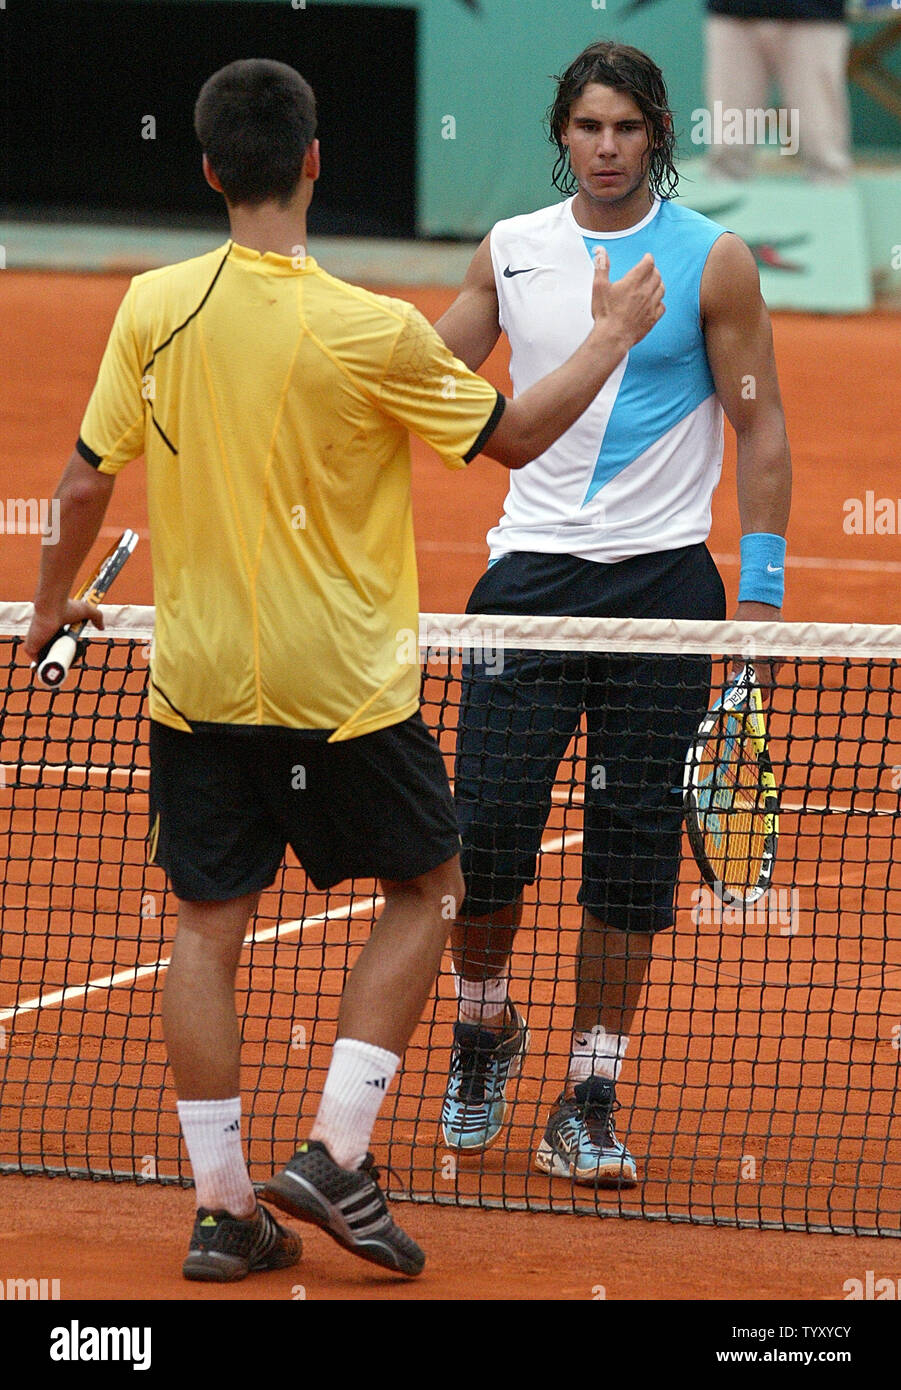 Rafael Nadal (R) of Spain shakes hands with Serb Novak Djokovic at the end  of their semi-final match at the French Open in Roland Garros, near Paris,  June 8, 2007. Nadal won